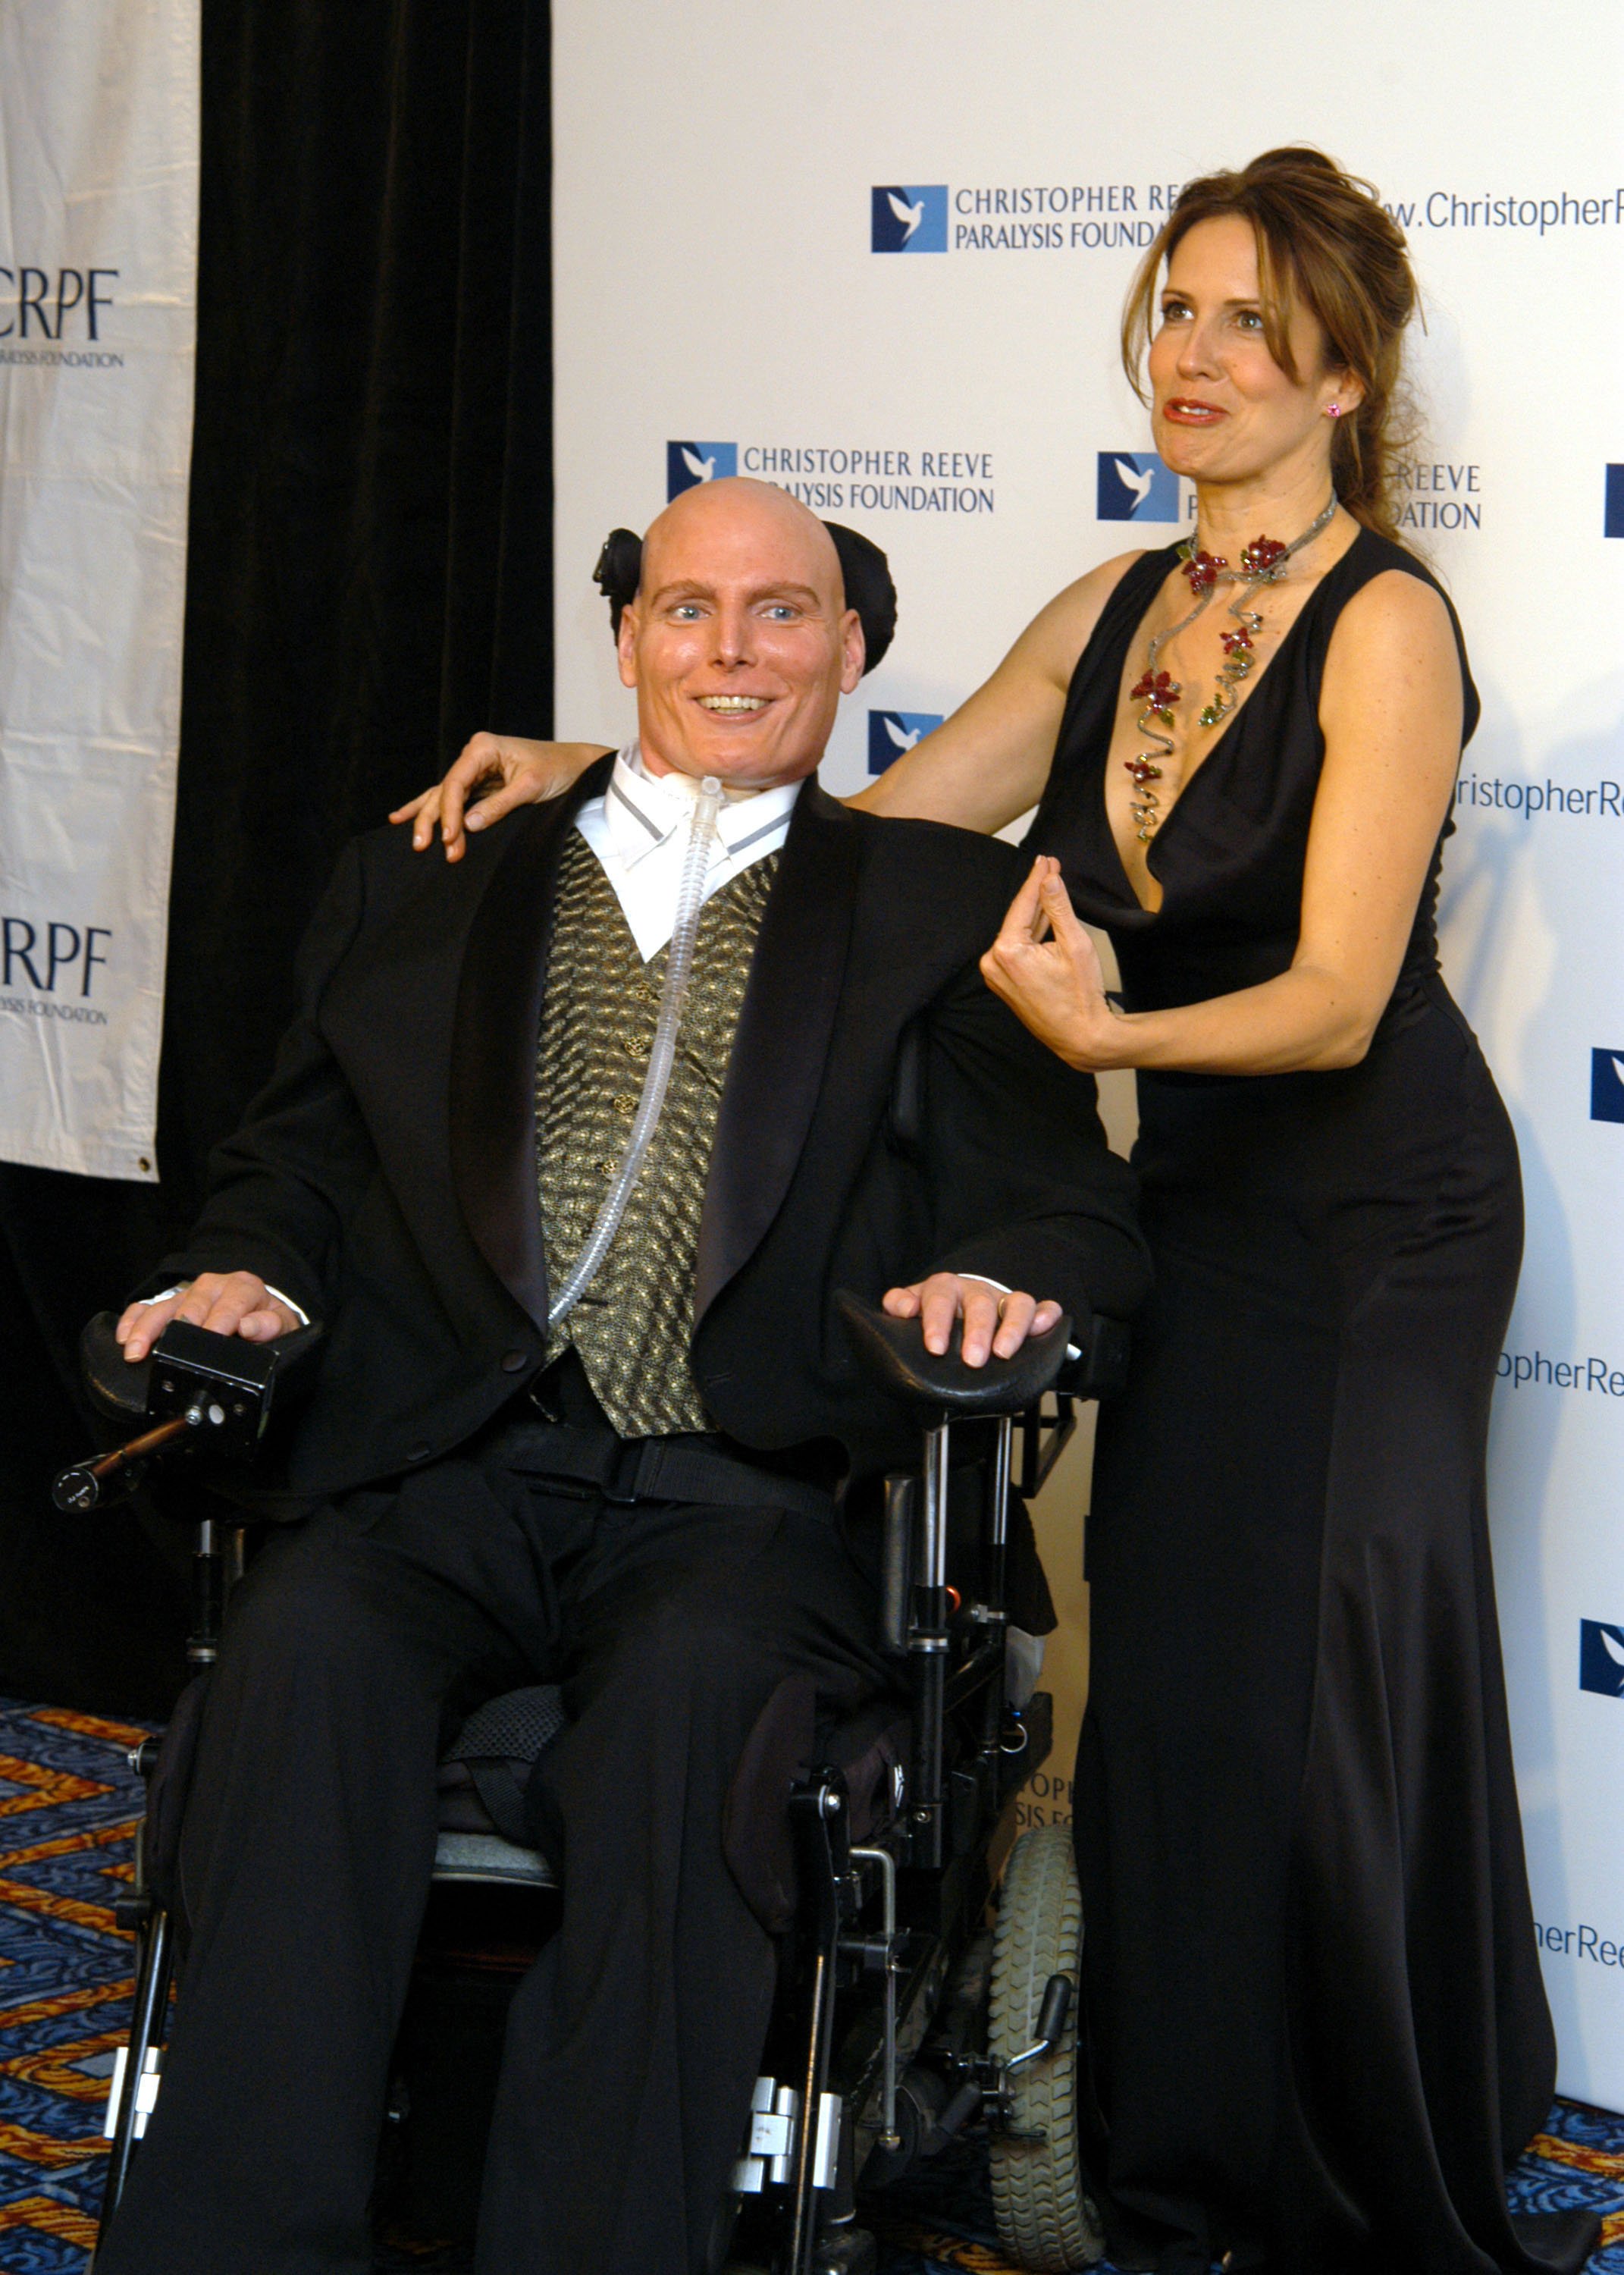 Christopher Reeve and Dana Reeve during the 13th Annual "A Magical Evening" Gala Hosted by The Christopher Reeve Paralysis Foundation at Marriot Marquis in New York City, New York, United States.  | Source: Getty Images